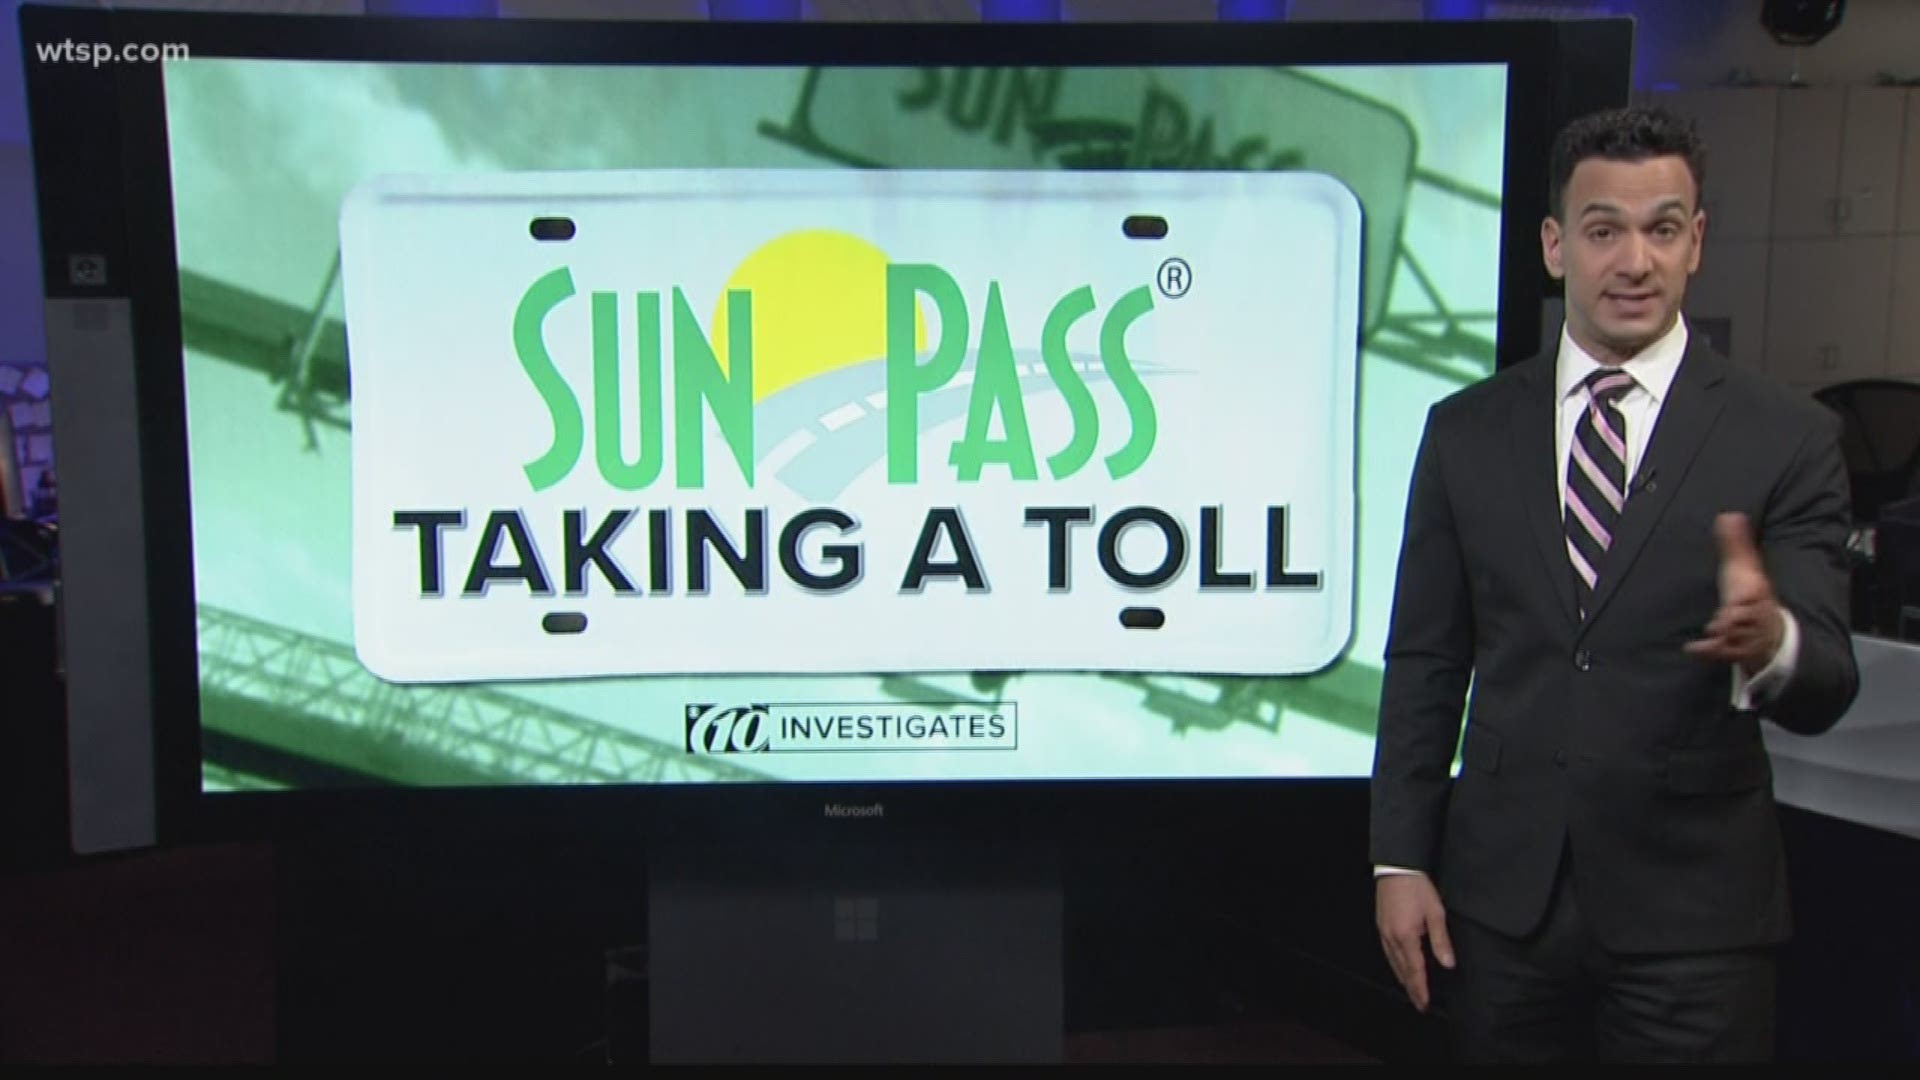 10Investigates has spoken to people who say Gov. Rick Scott's campaigning is slowing down the response to the SunPass debacle.